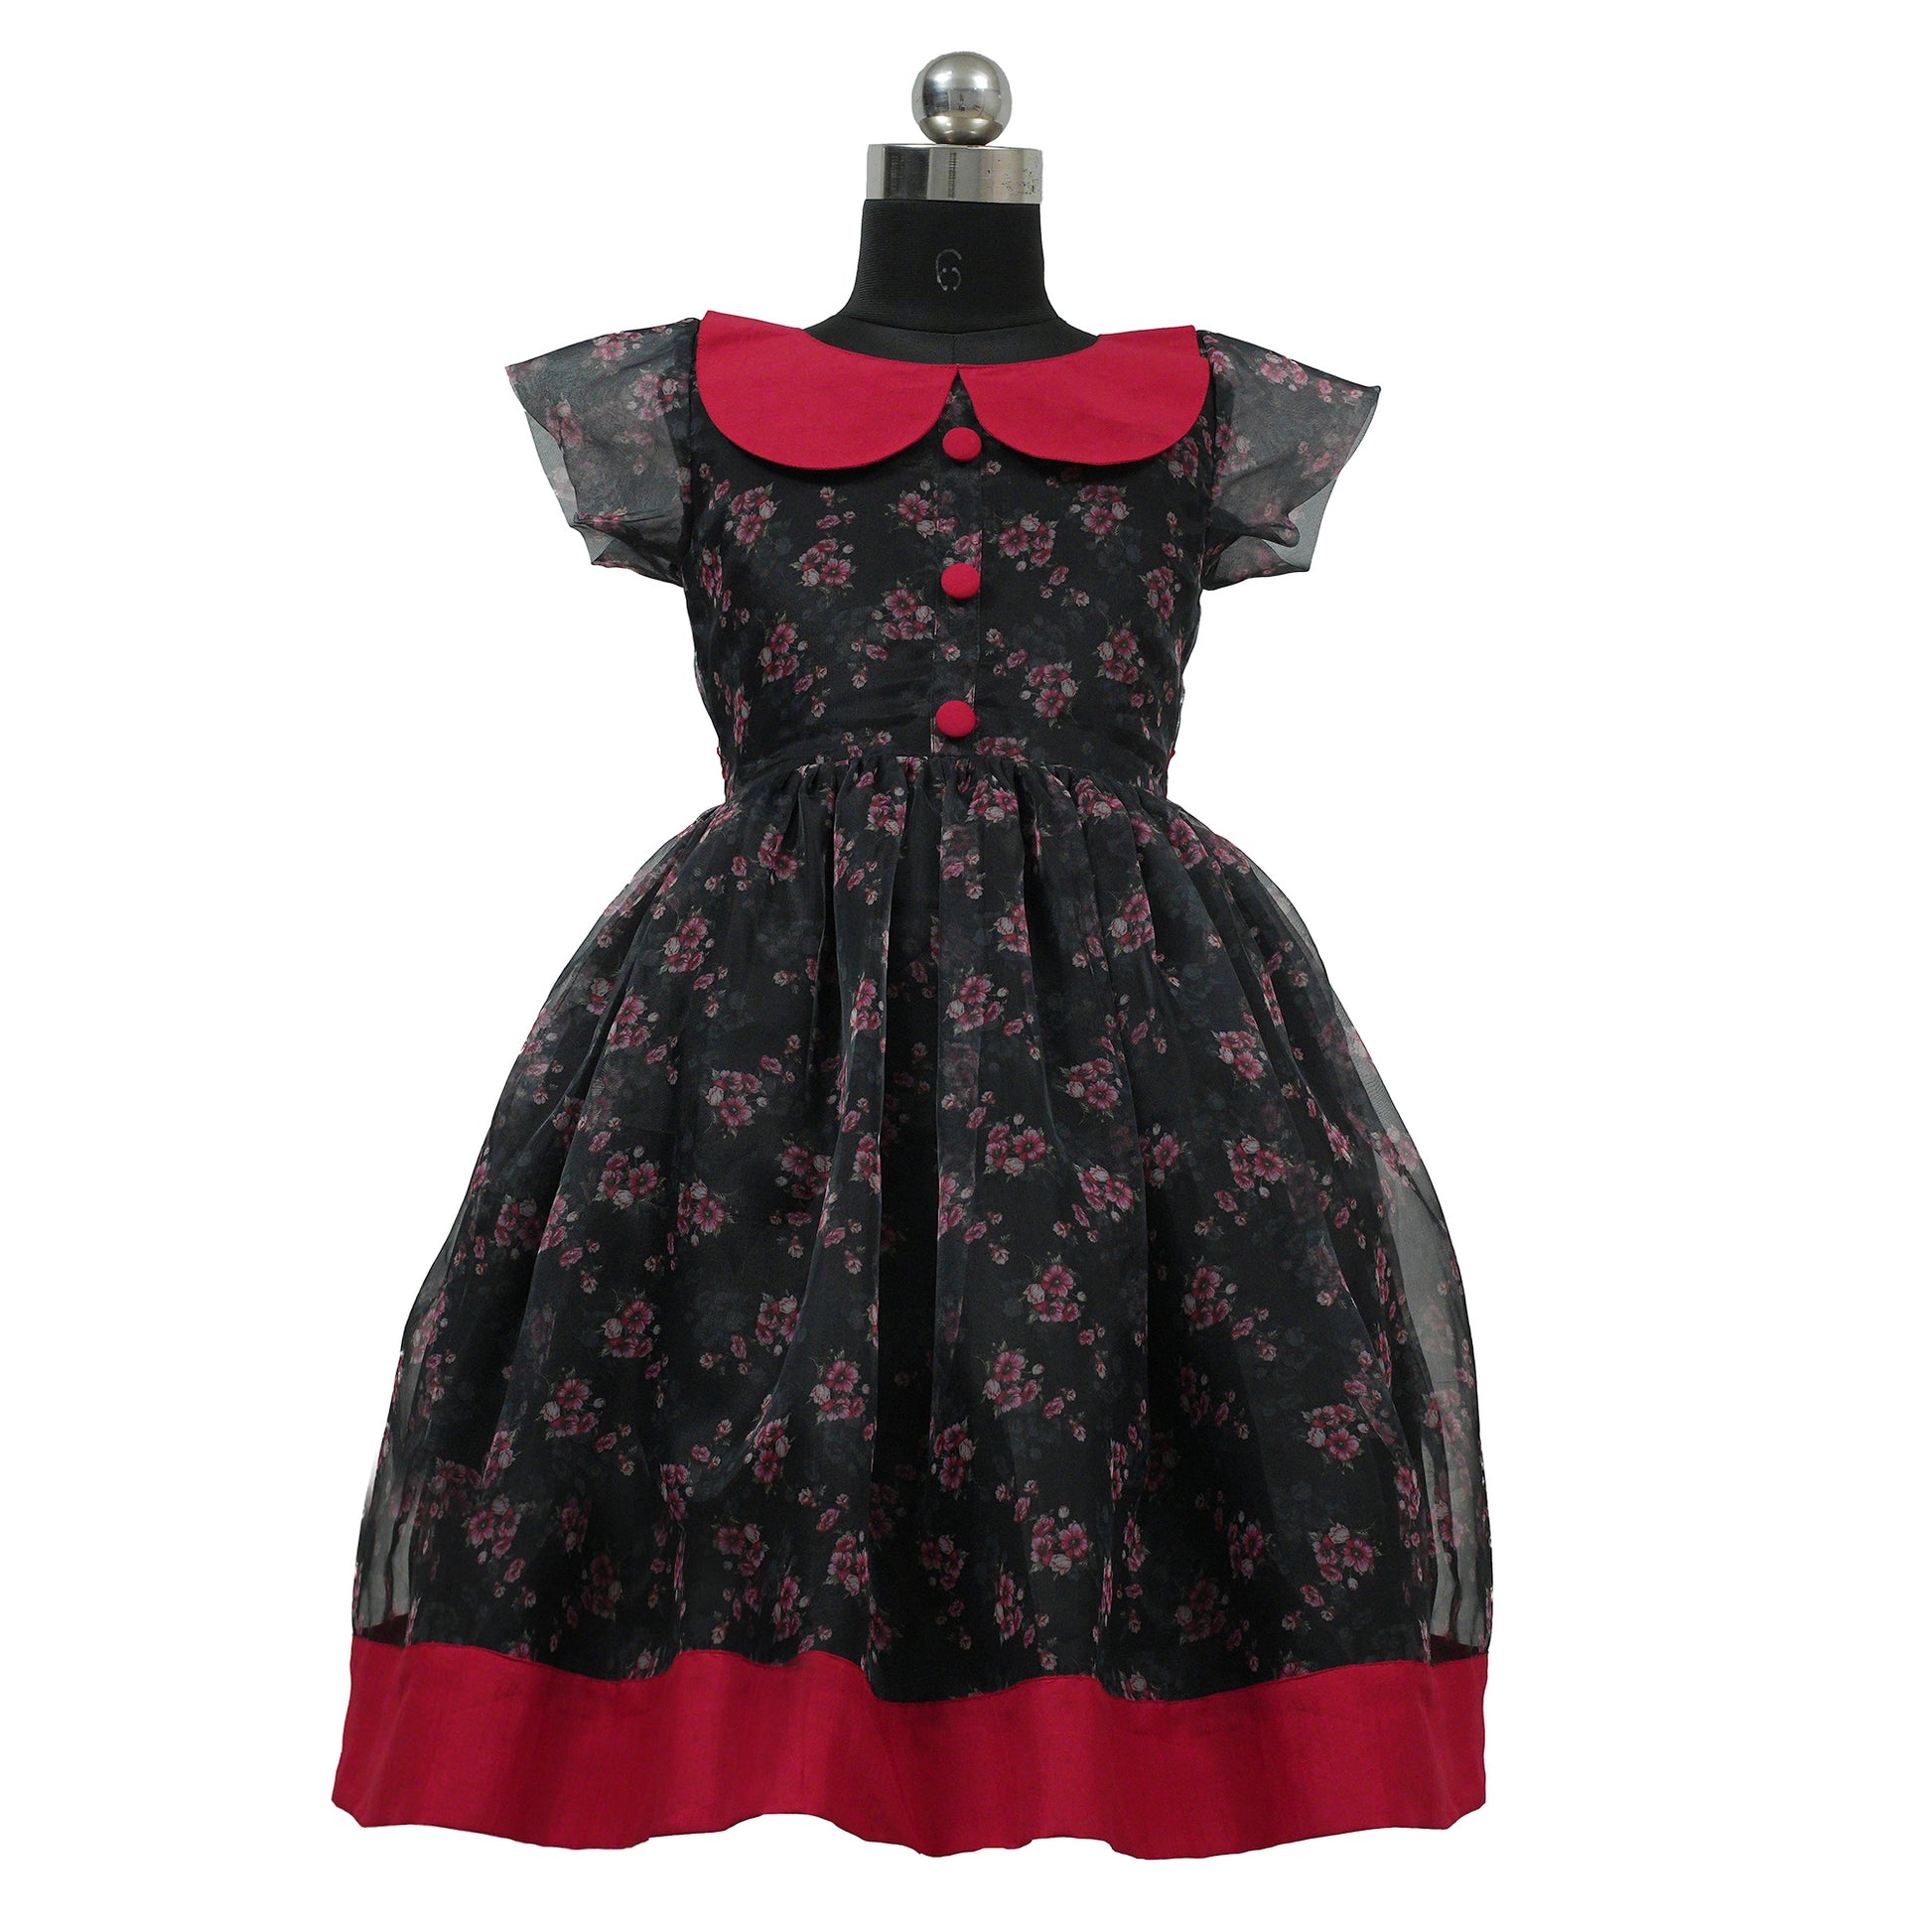 New fashion frock for kids, unique designer dresses stylish comfortable collection baby girl dresses Red party frock 2023 bacchon ki gown 3 years old kids clothing stores online shopping India